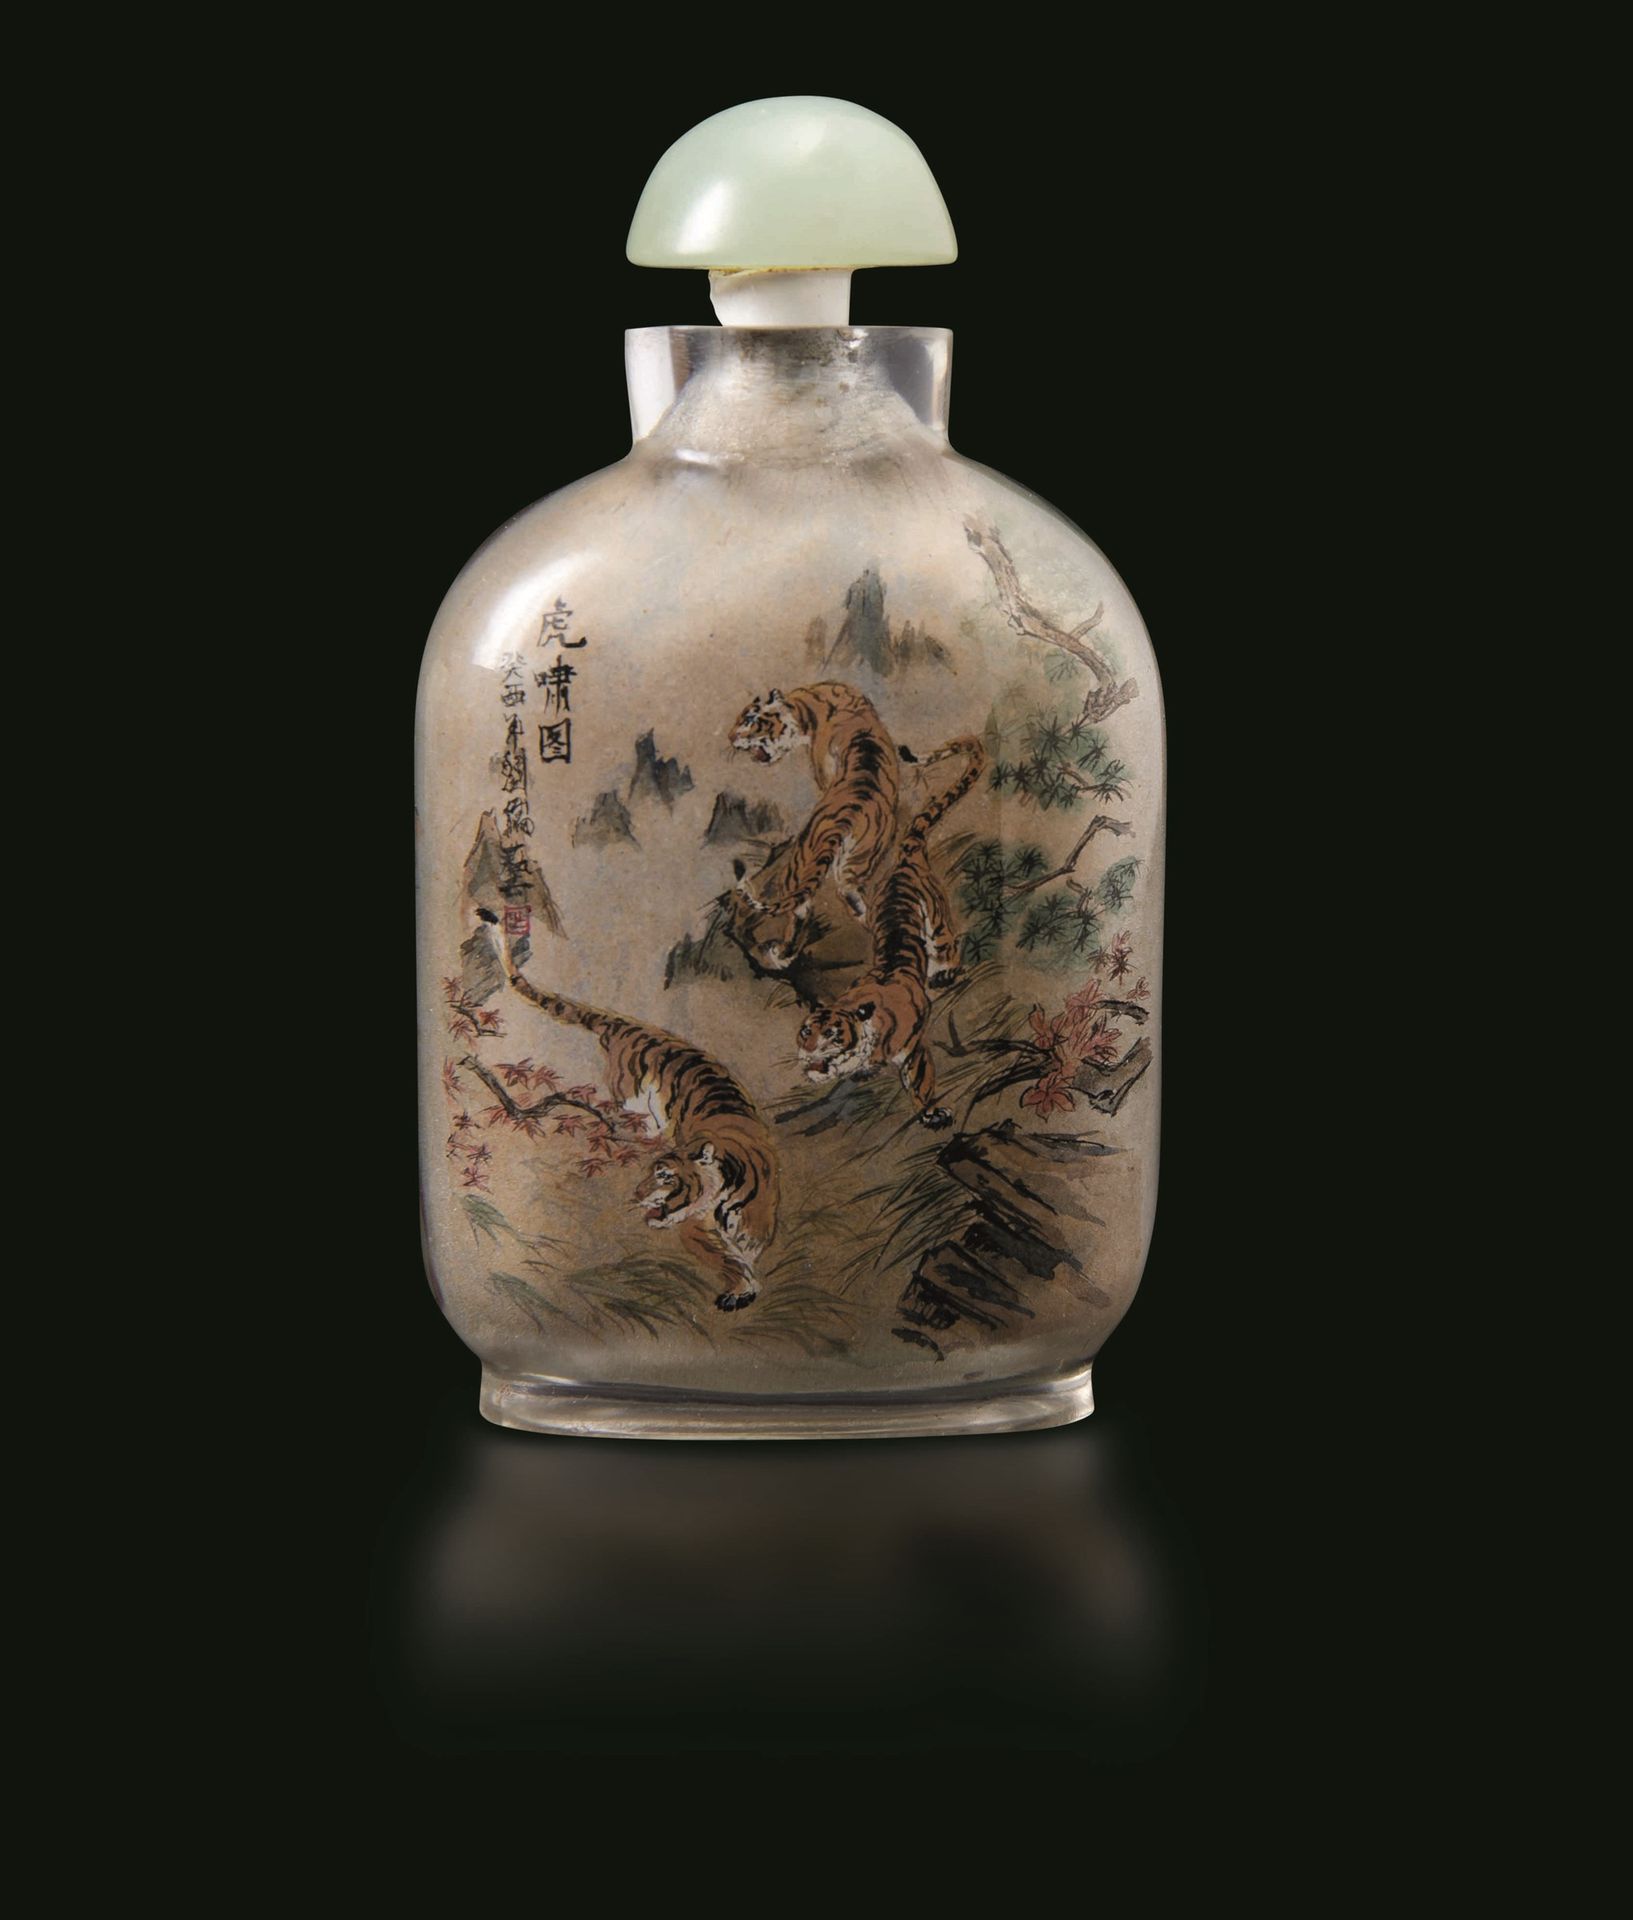 A glass snuff bottle, China, Qing Dynasty, 1800s 高8厘米